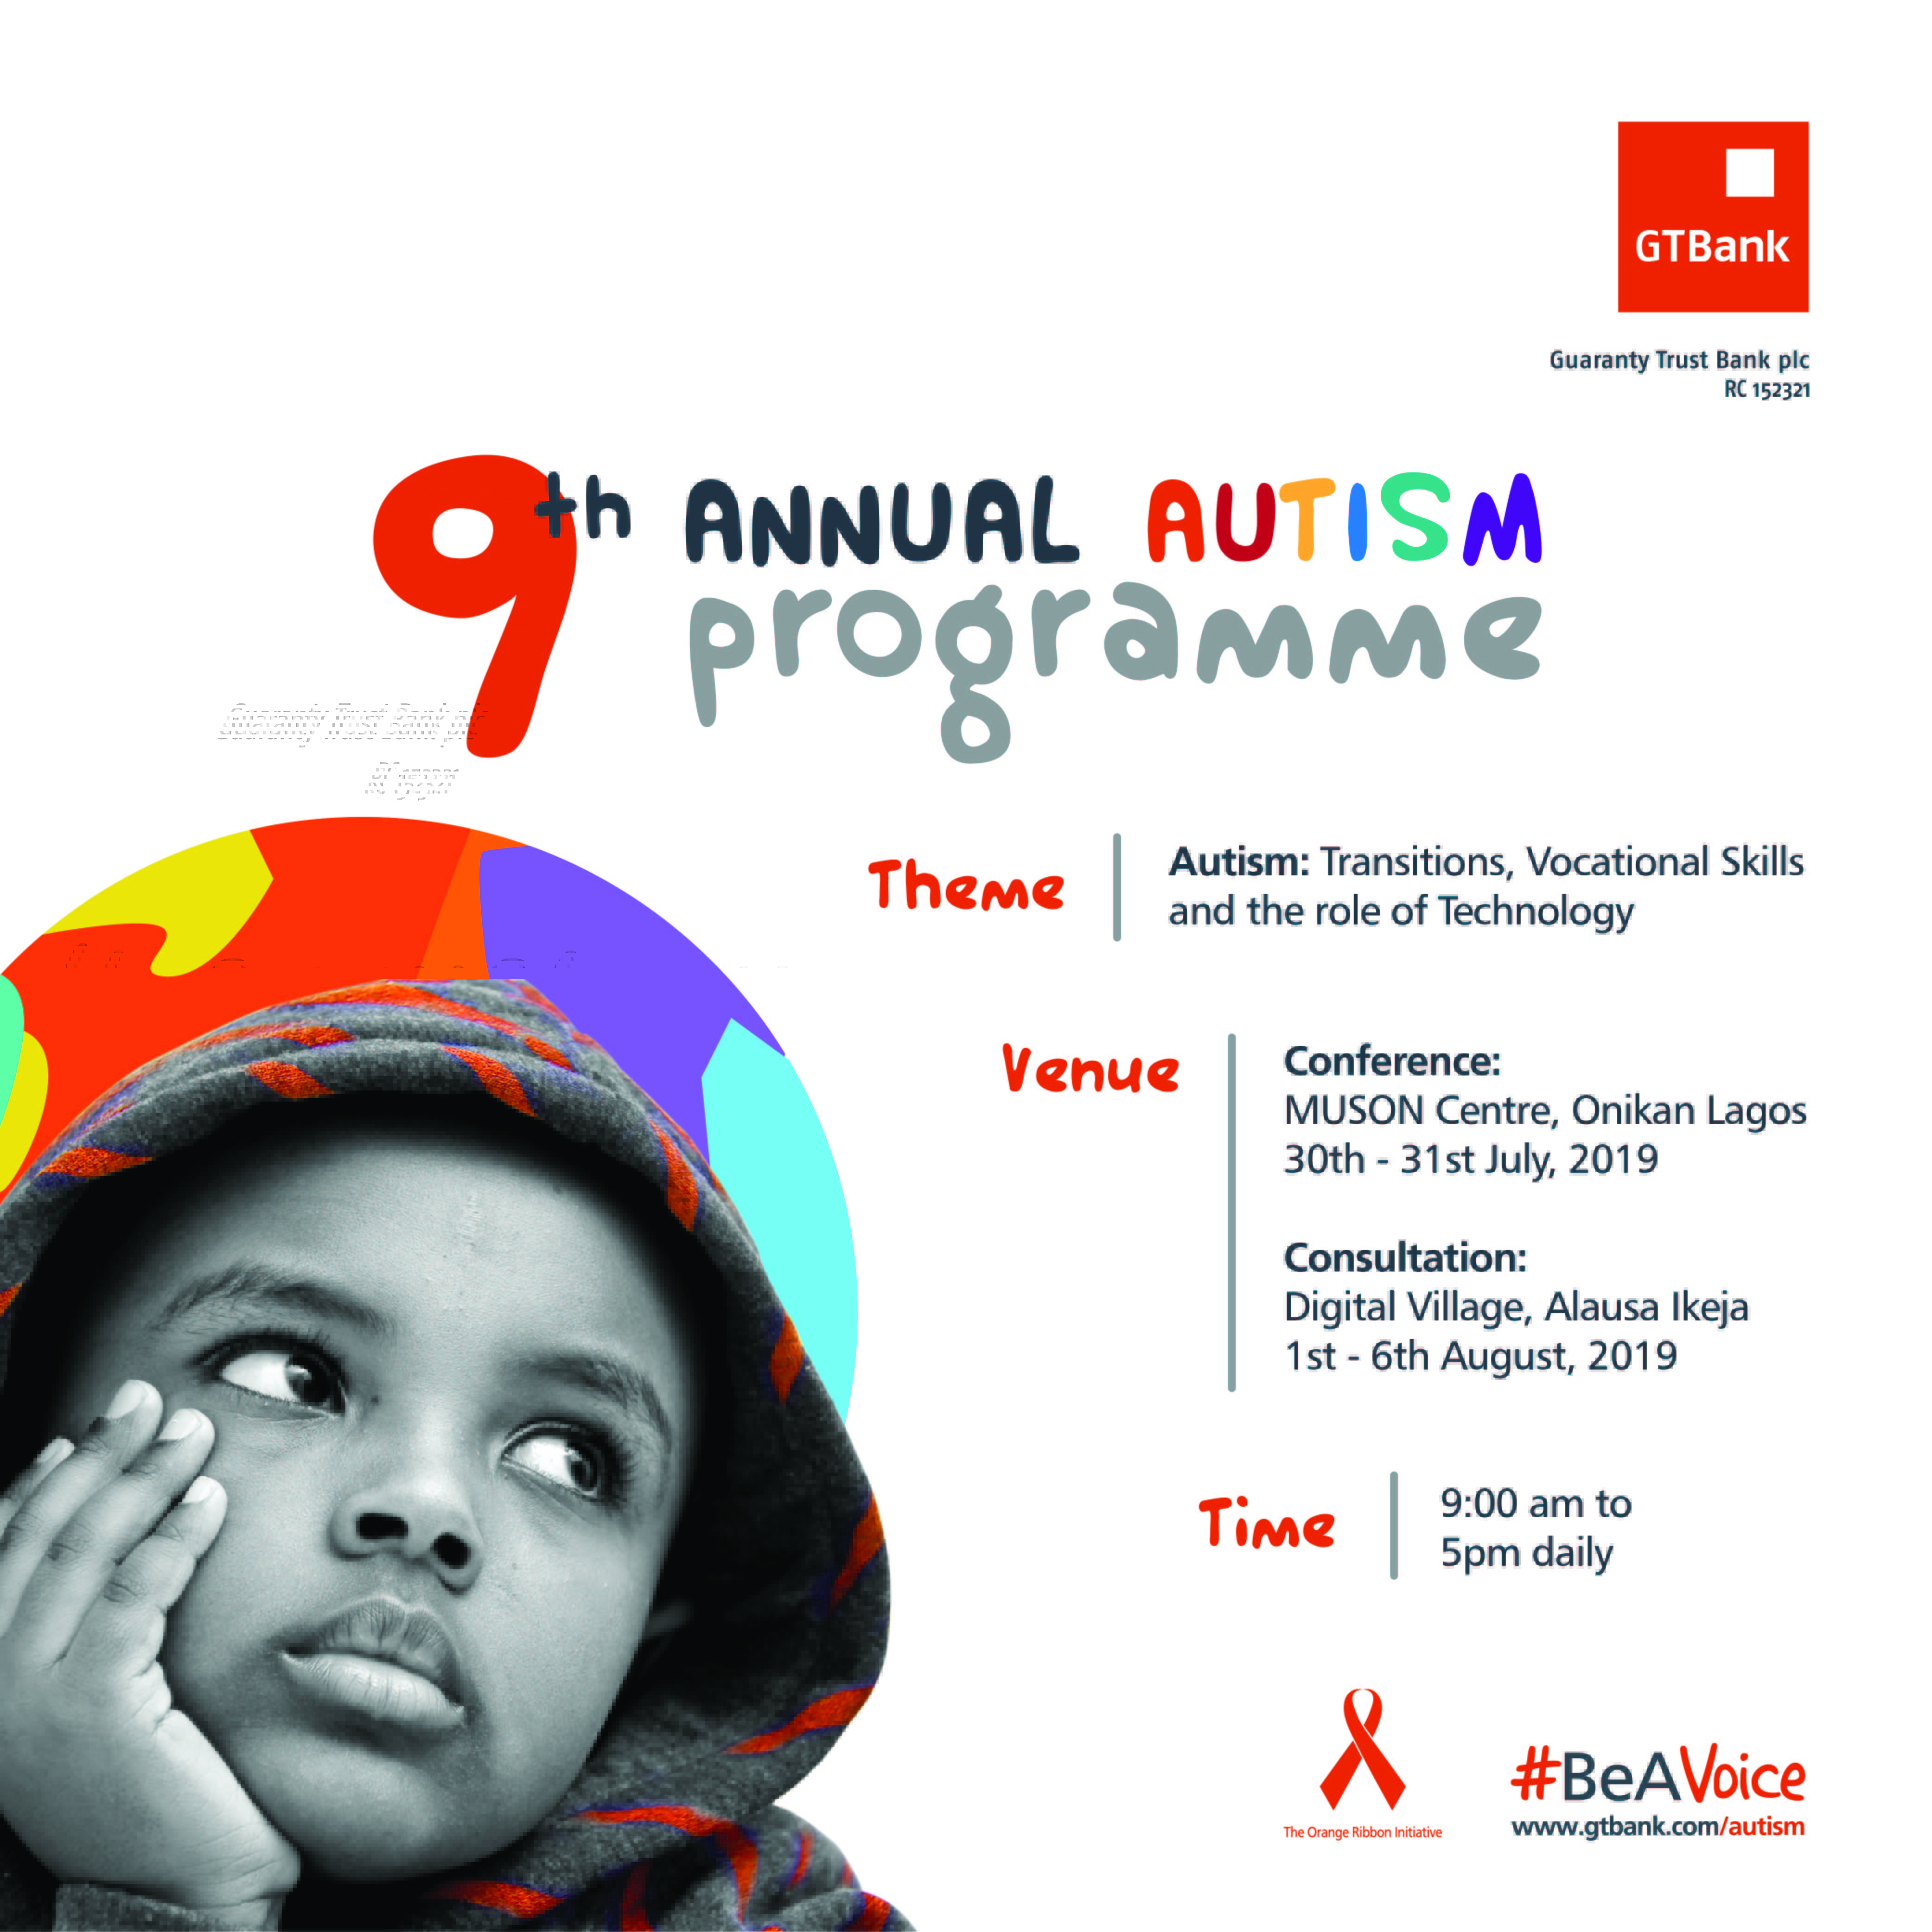 GTBank Holds 9th Annual Autism Conference